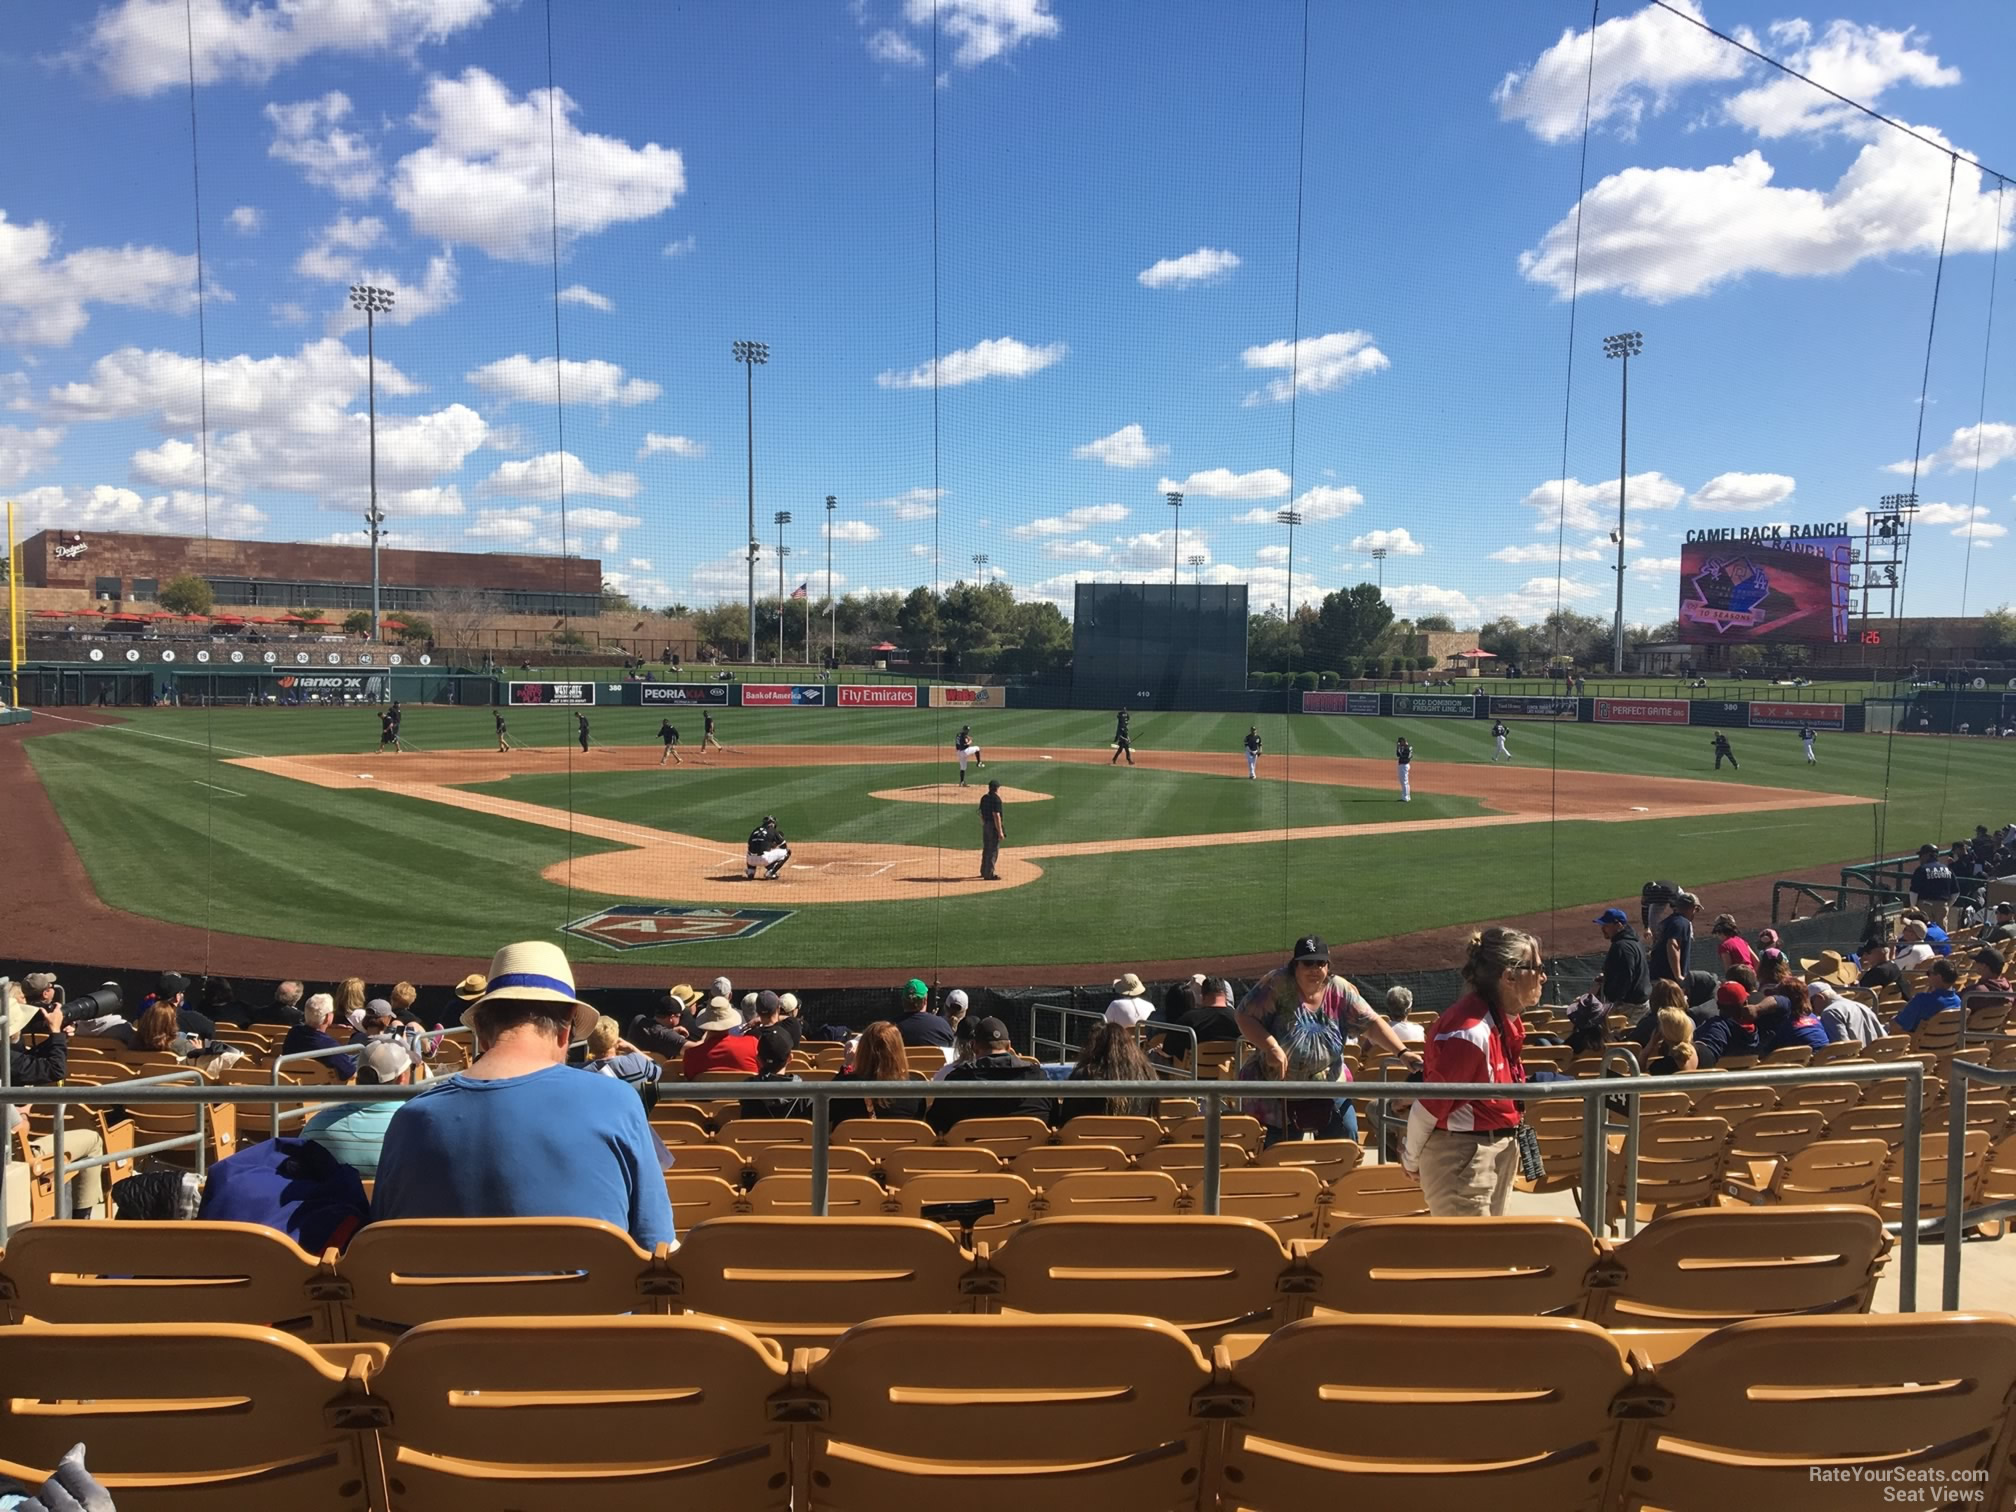 section 114, row 5 seat view  - camelback ranch